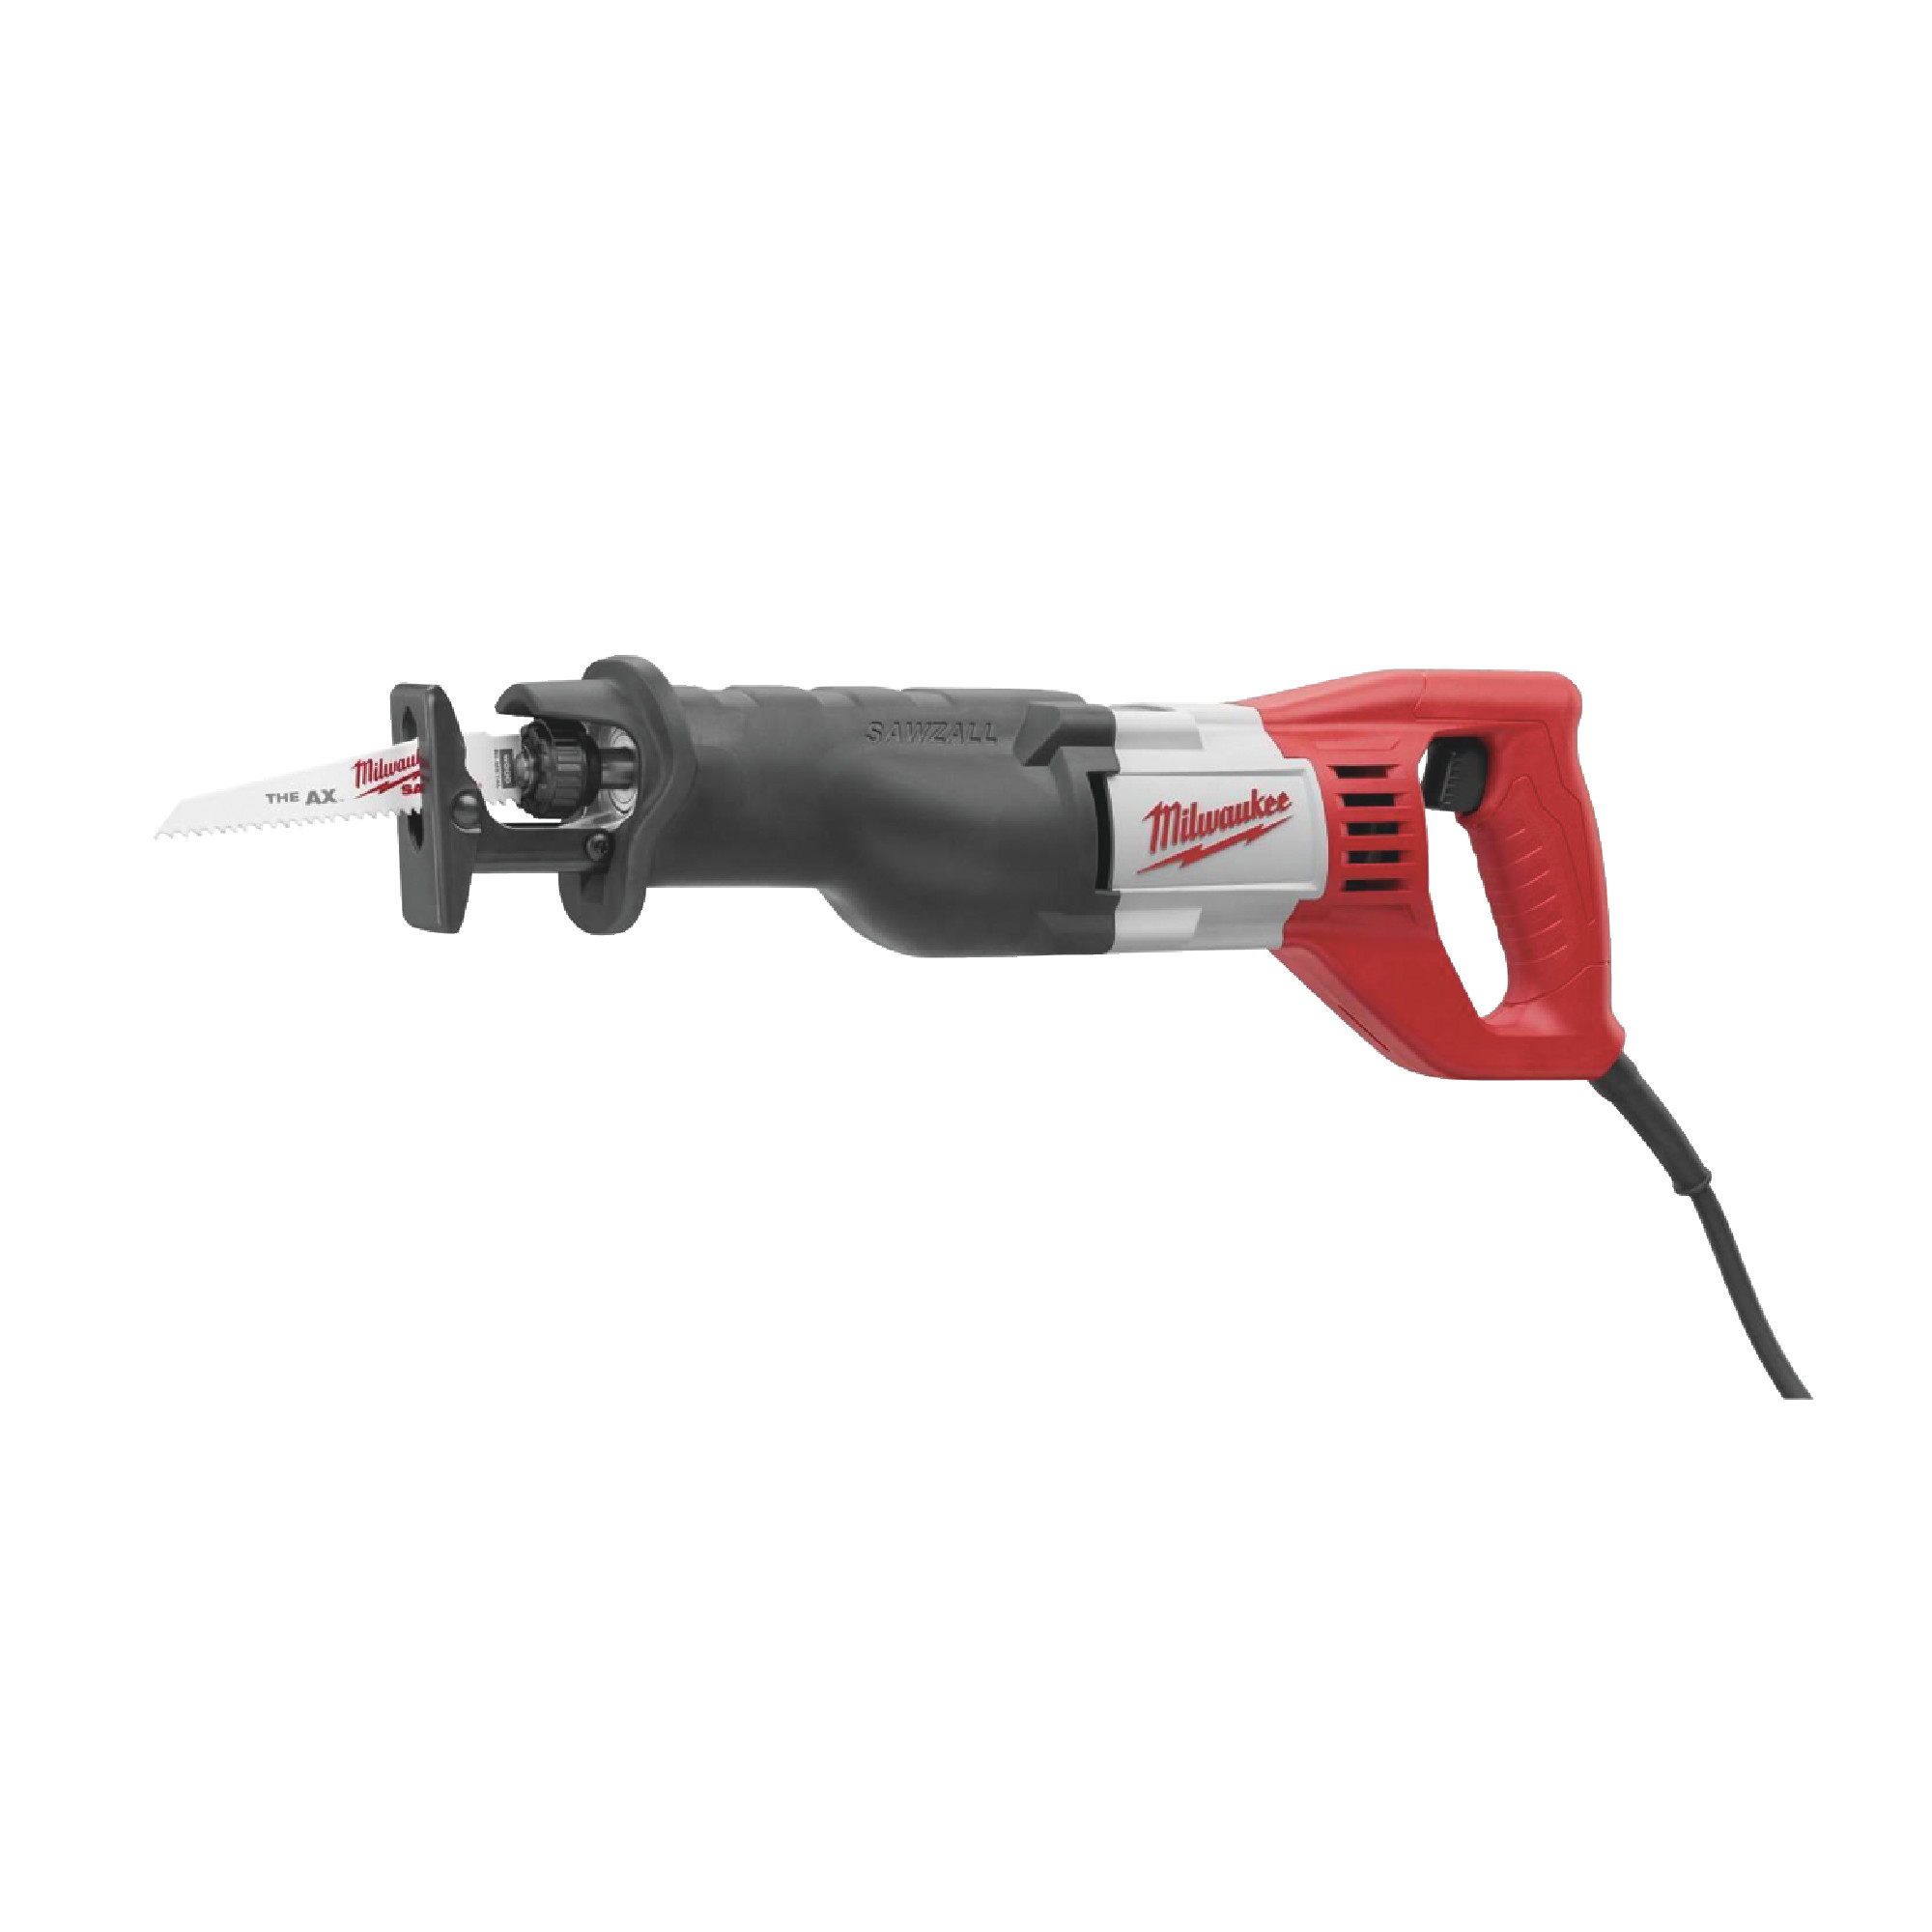 120V Corded Reciprocating Saw